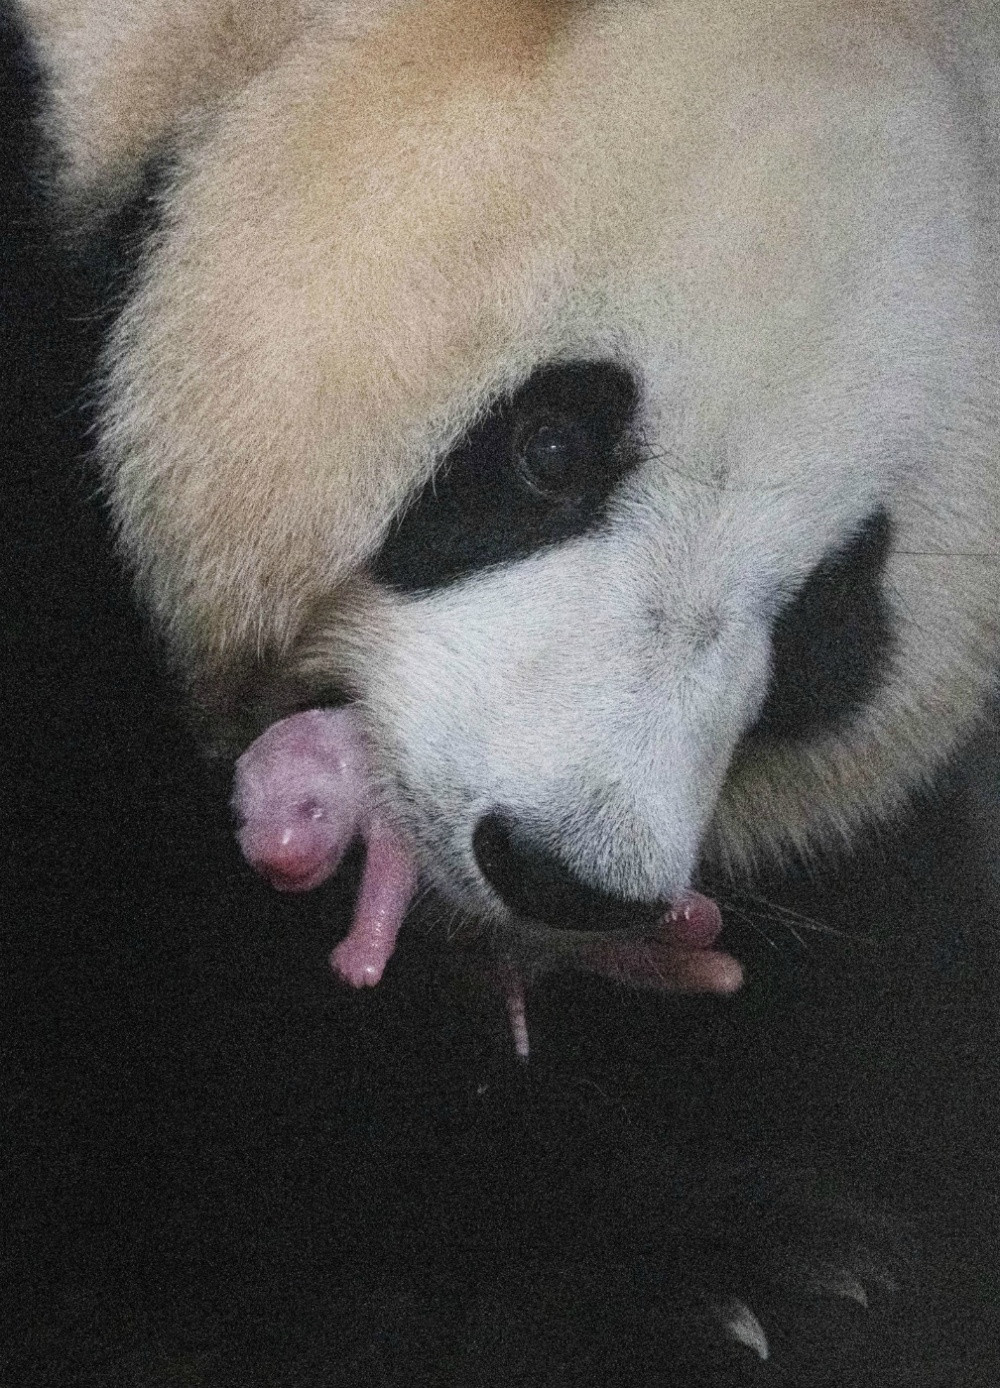 The giant panda and cub